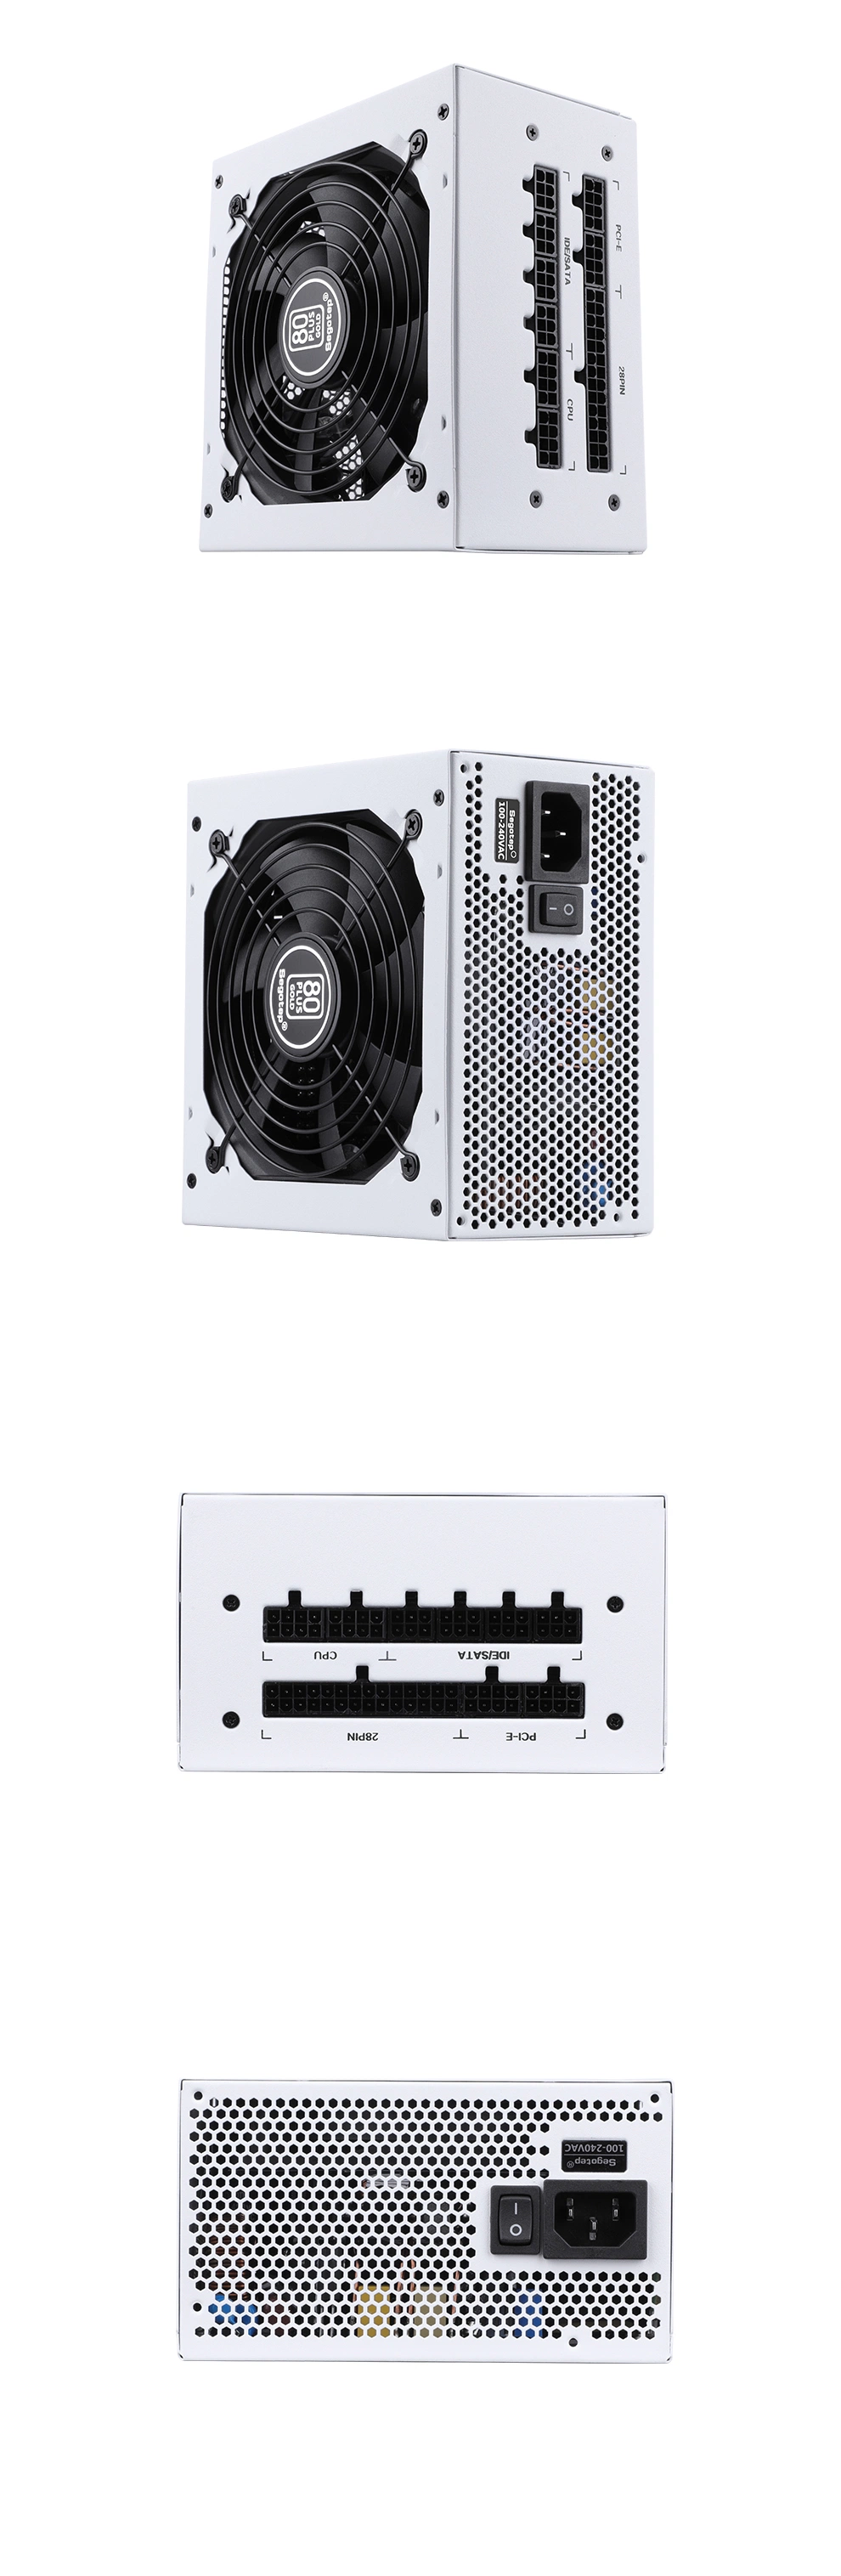 Segotep-650W-850W-Pcie5.0-80plus-Gold-ATX-Switching-Power-Supply-with-4-Pcie-92.05%-Conversion-Efficiency